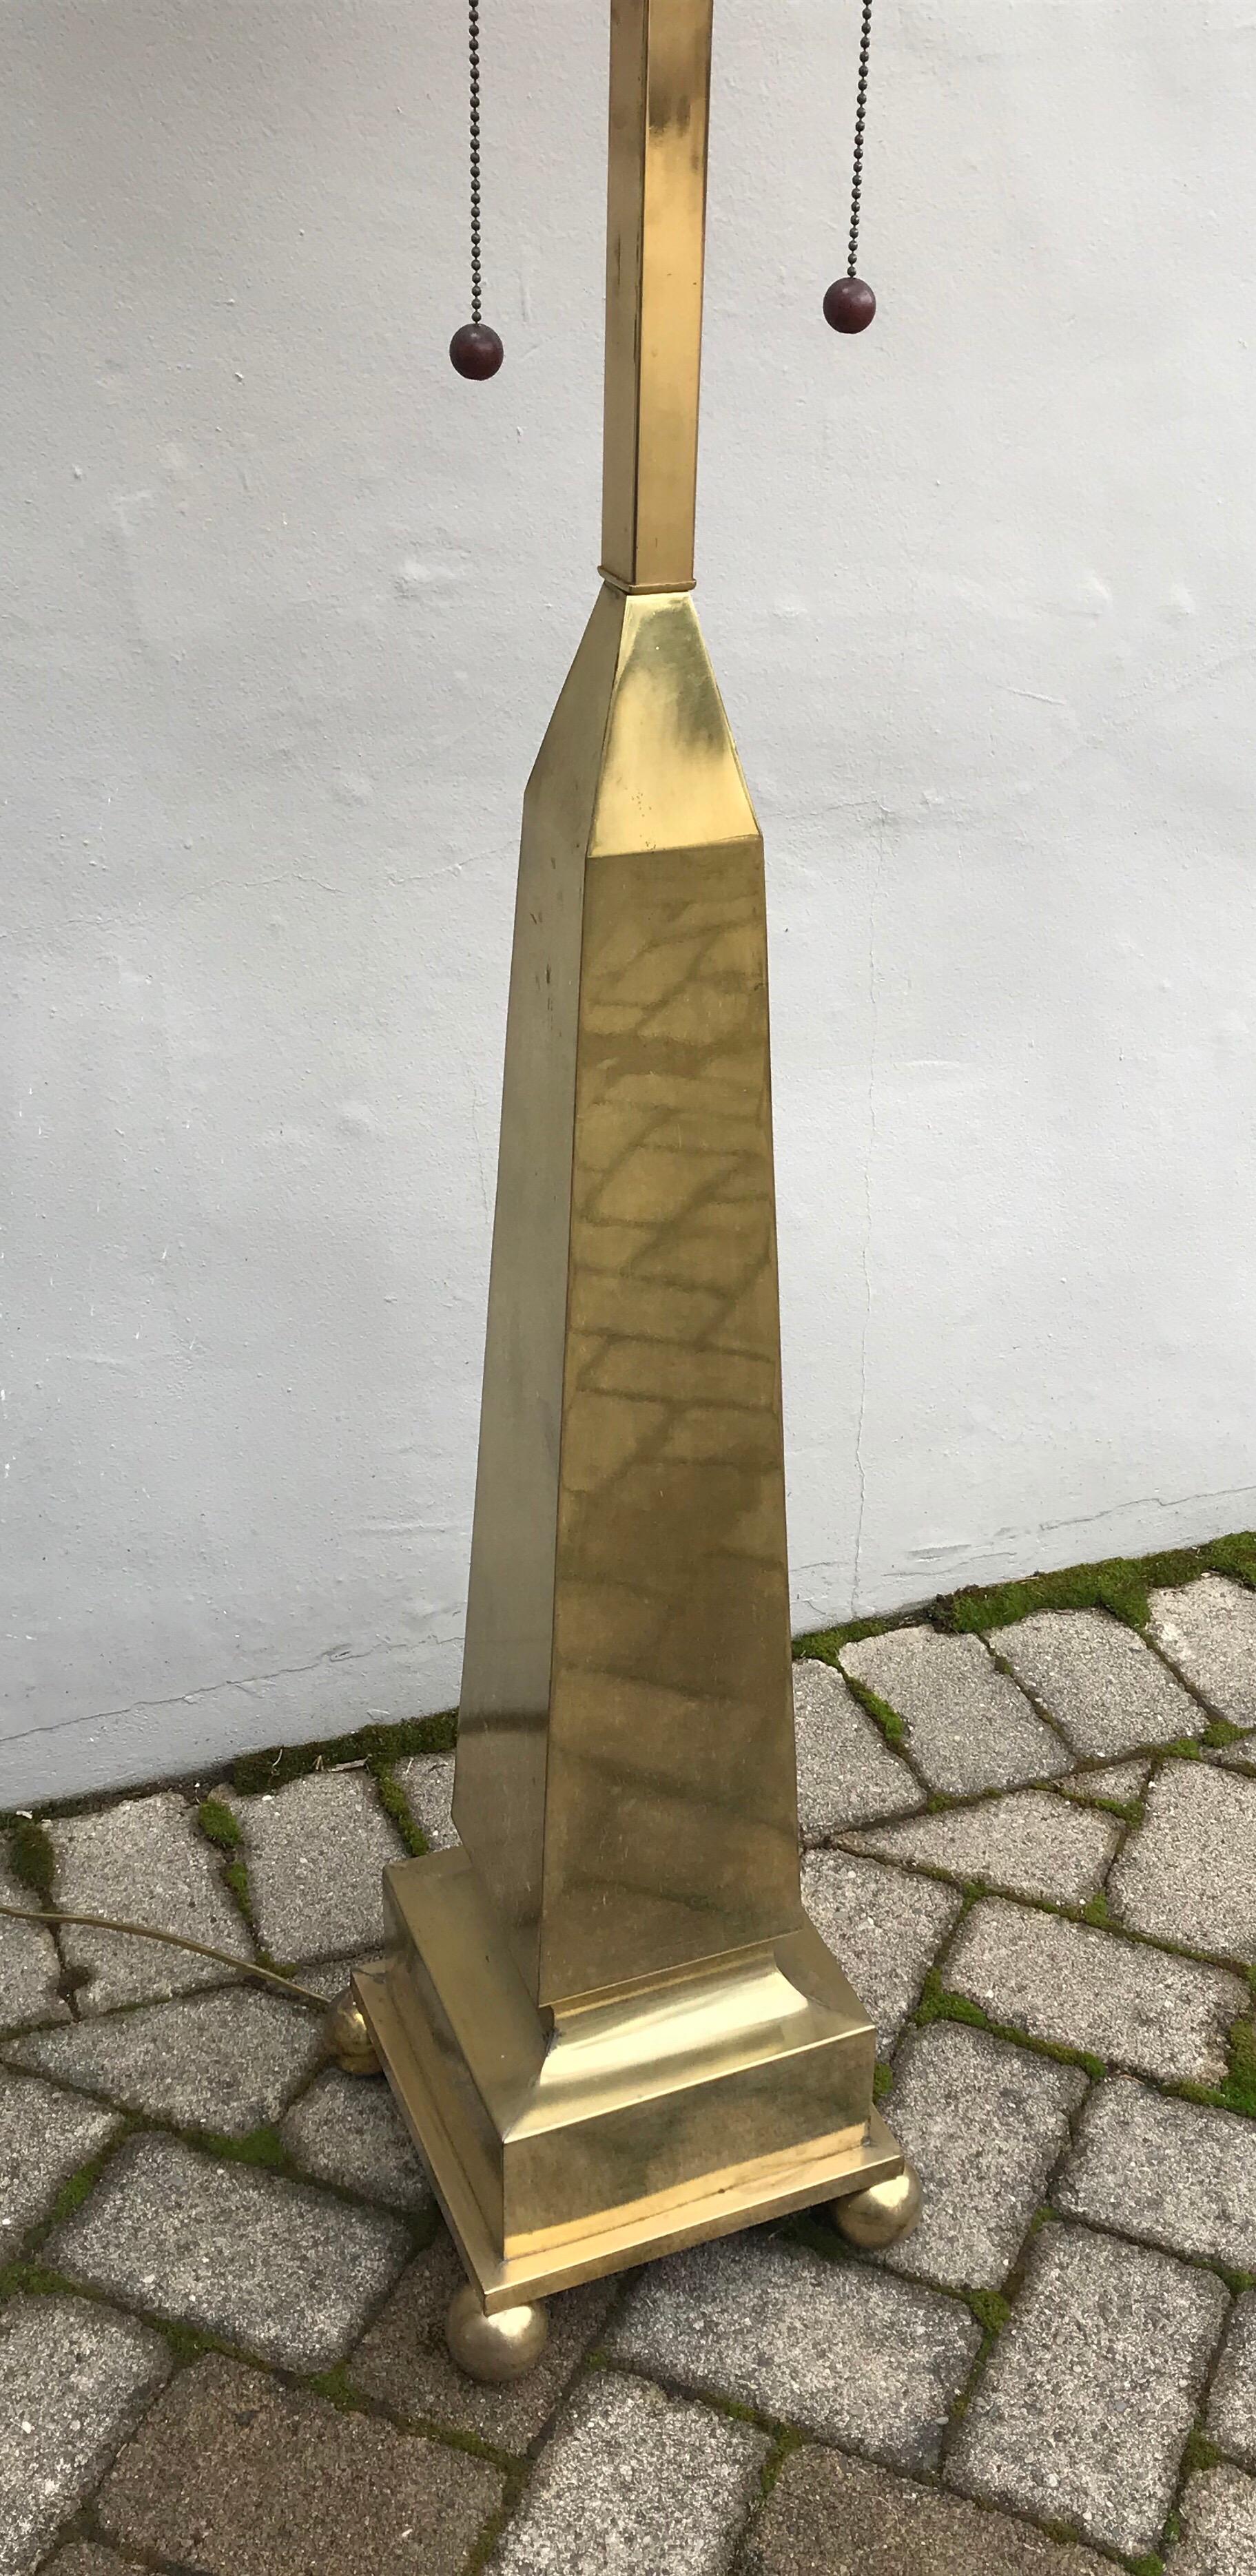 Hollywood Regency pyramid tapered brass floor lamp by Marbro Lamp Company. 1970’s, great patina.
Working order but rewiring recommend, shade not included.